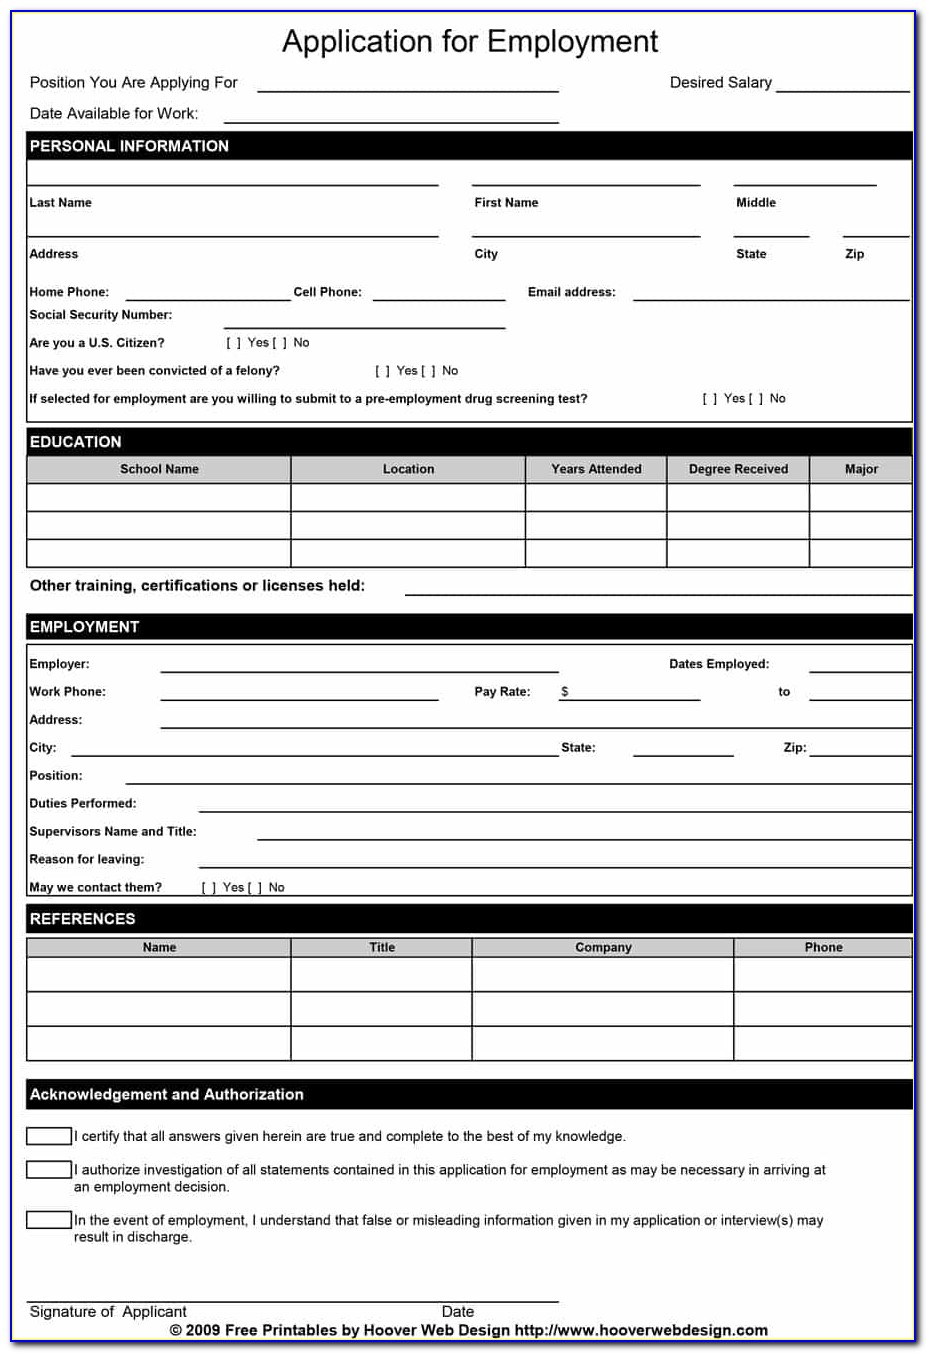 Registration Form Template Free Download In Php